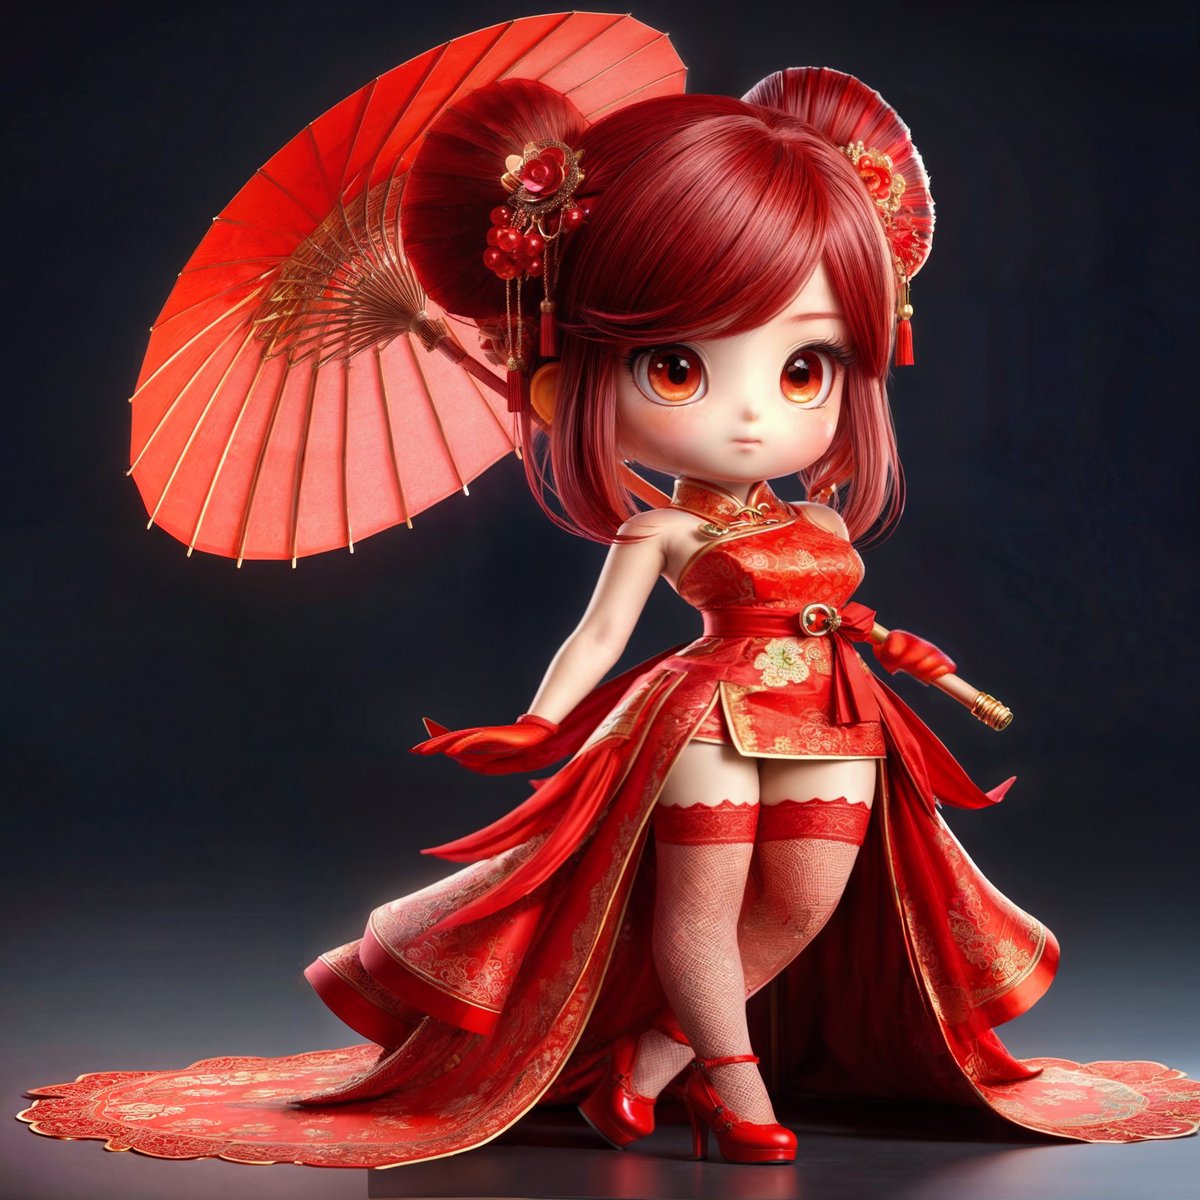 ❤Akane the Red Guardian of the Chibi Order of Silk ❤

redbubble.com/shop/ap/161166…

#chibinationpopz  #Sticker #Cellphonecase #Poster #tshirt #ai #aiart #AIcommunity #chibistyle #passion #powerful #traditional #cultural #fashionista #styleicon #trendsetter #unique #bold #empowering